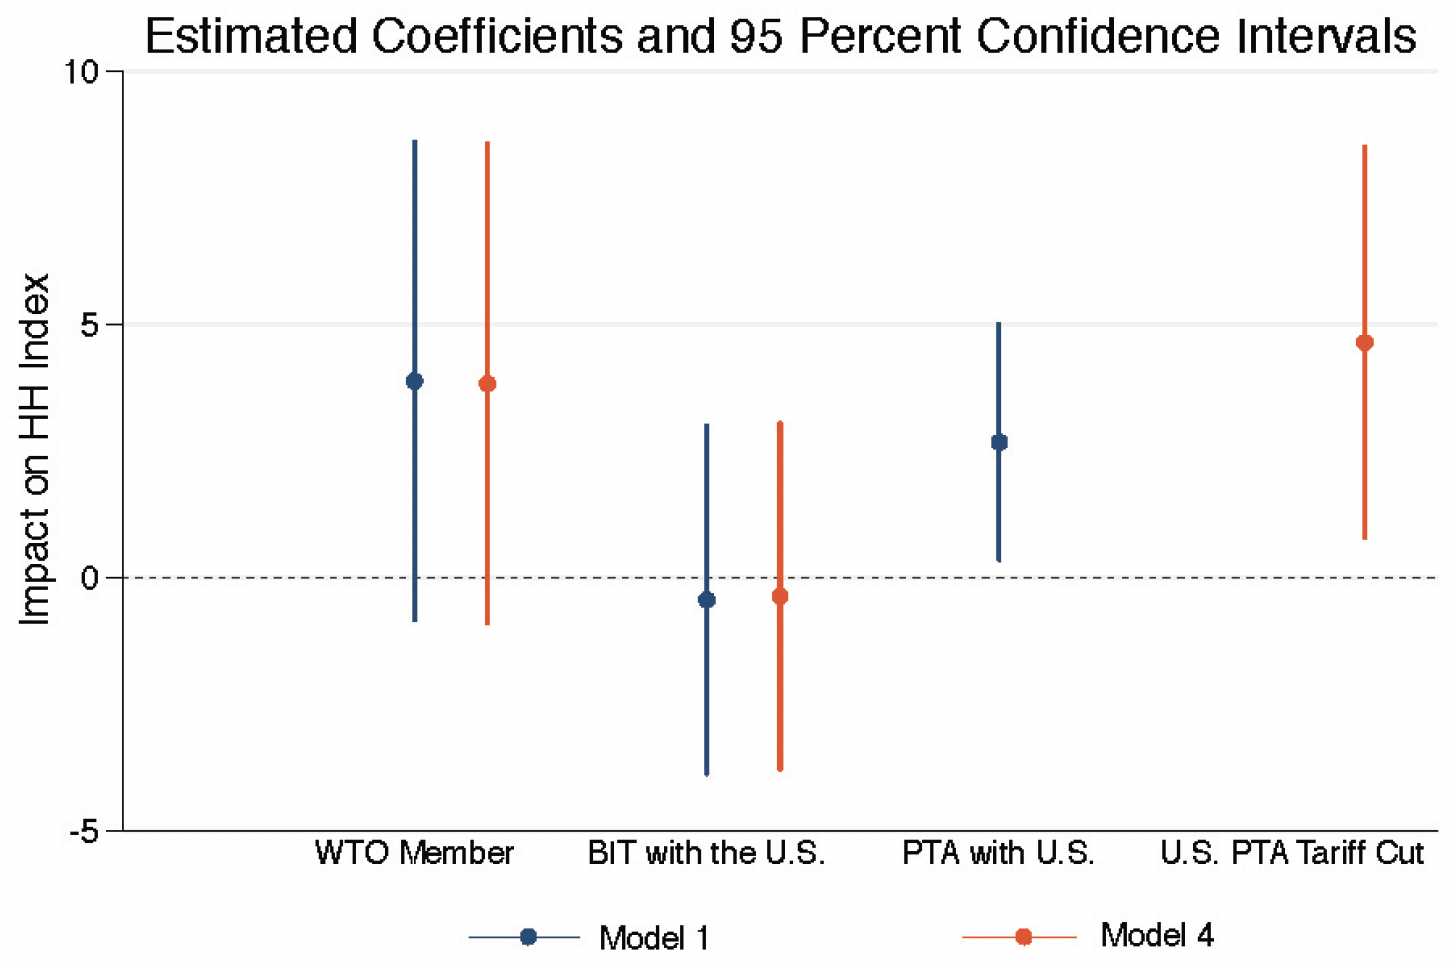 This graph shows the estimated coefficients and confidence intervals of the international agreements and concentration of affiliate sales data.